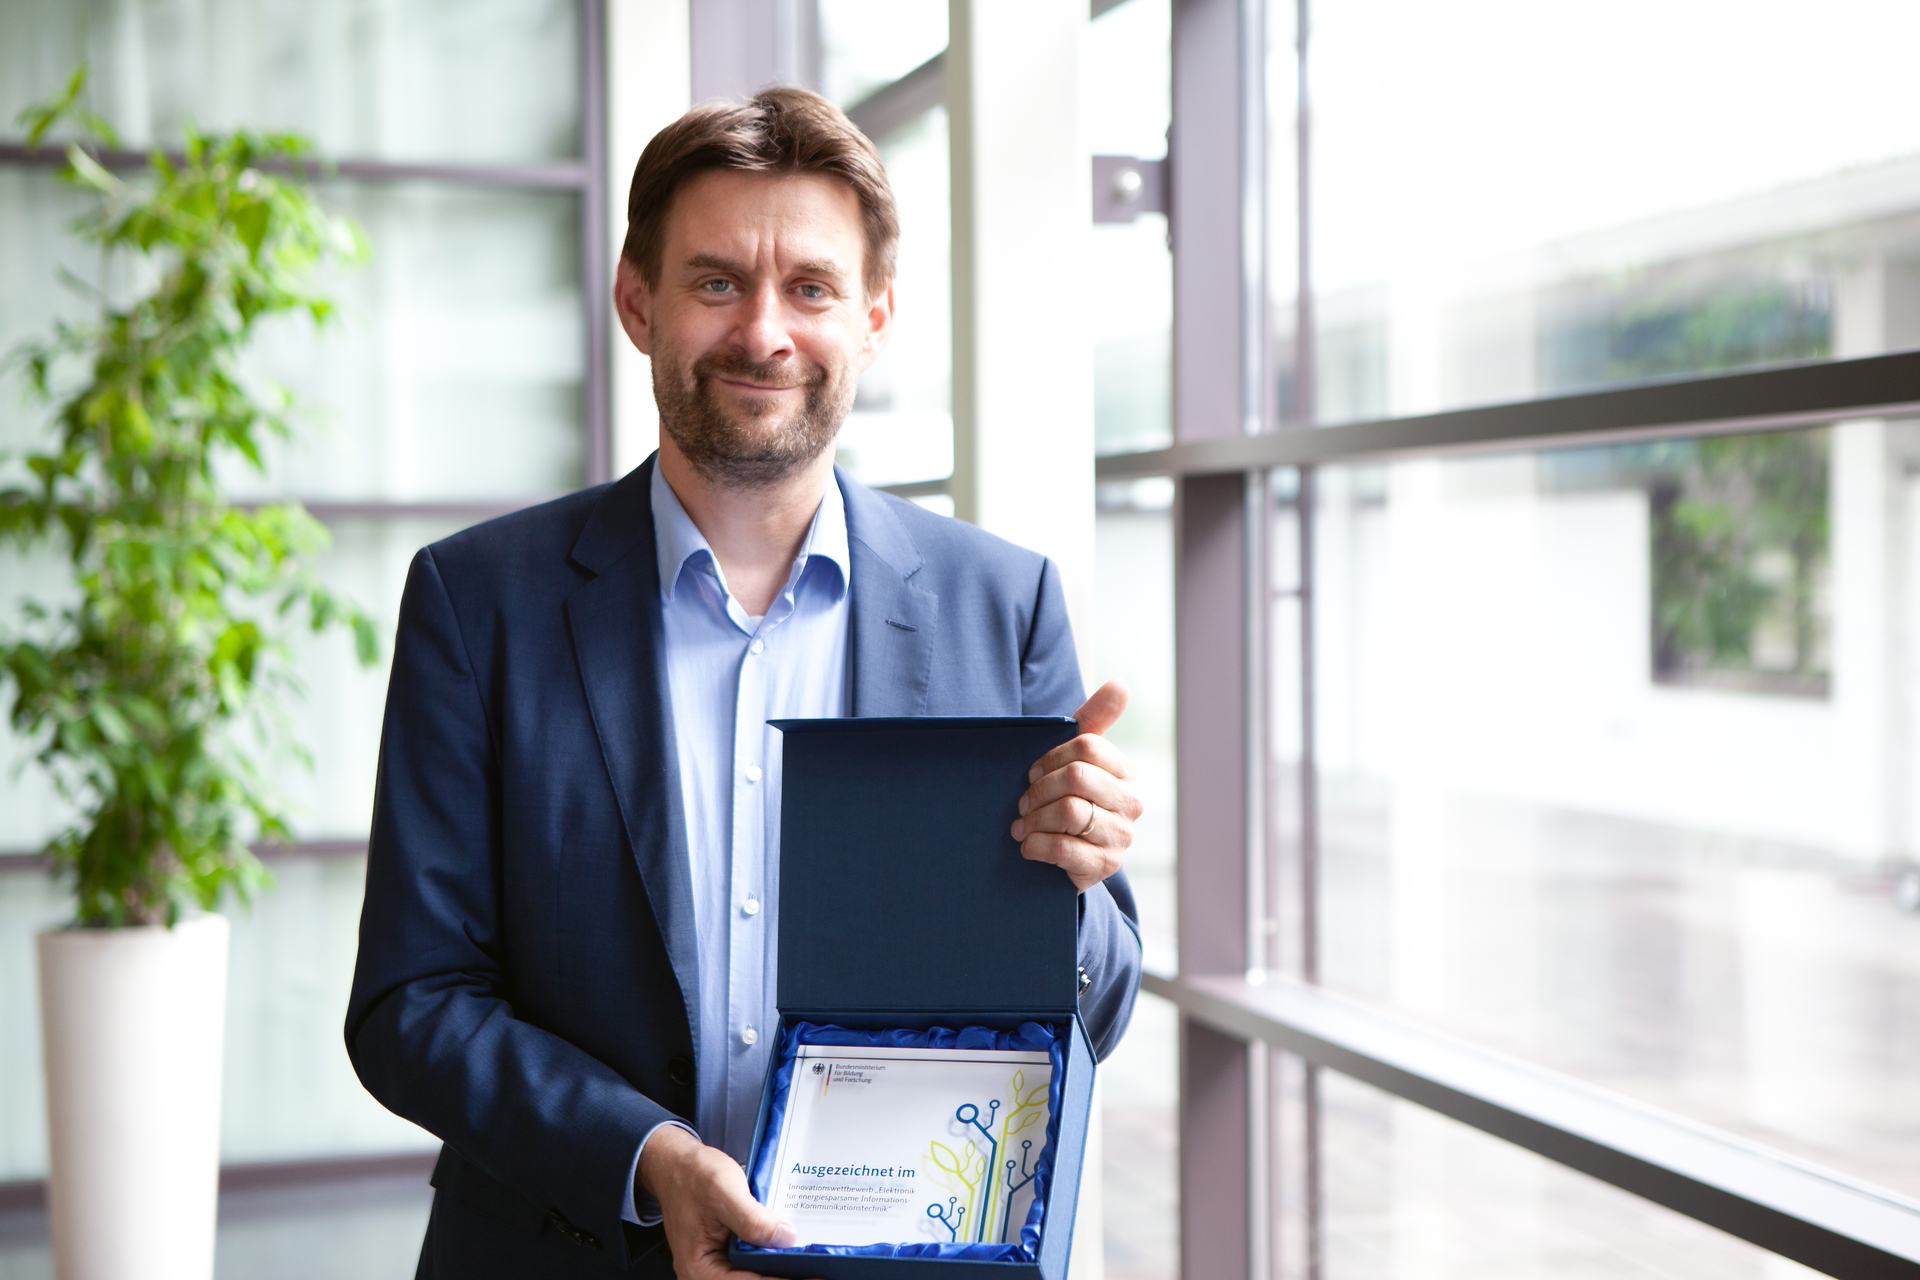 Innovation competition “Electronics for Energy-Saving ICT”: Prof. Quay with the award for project "EdgeLimit"